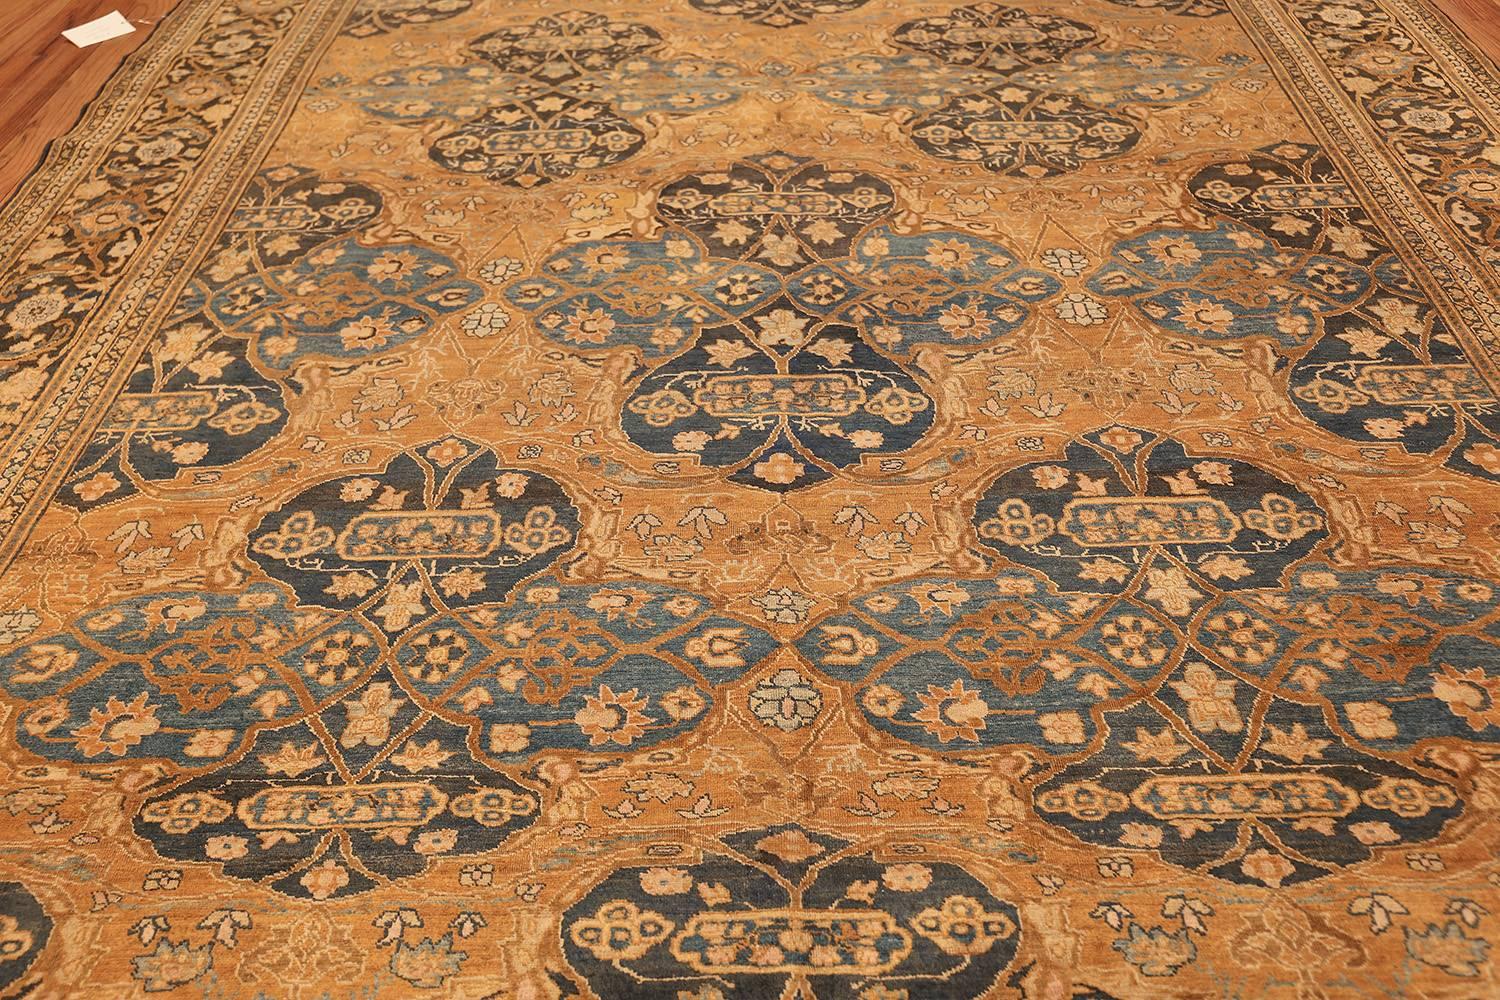 Beautiful and extremely decorative antique neutral earth tone color Persian Khorasan rug, country of origin / rug type: Persian rug, circa date: 1920.  Size: 9 ft x 12 ft 5 in (2.74 m x 3.78 m).